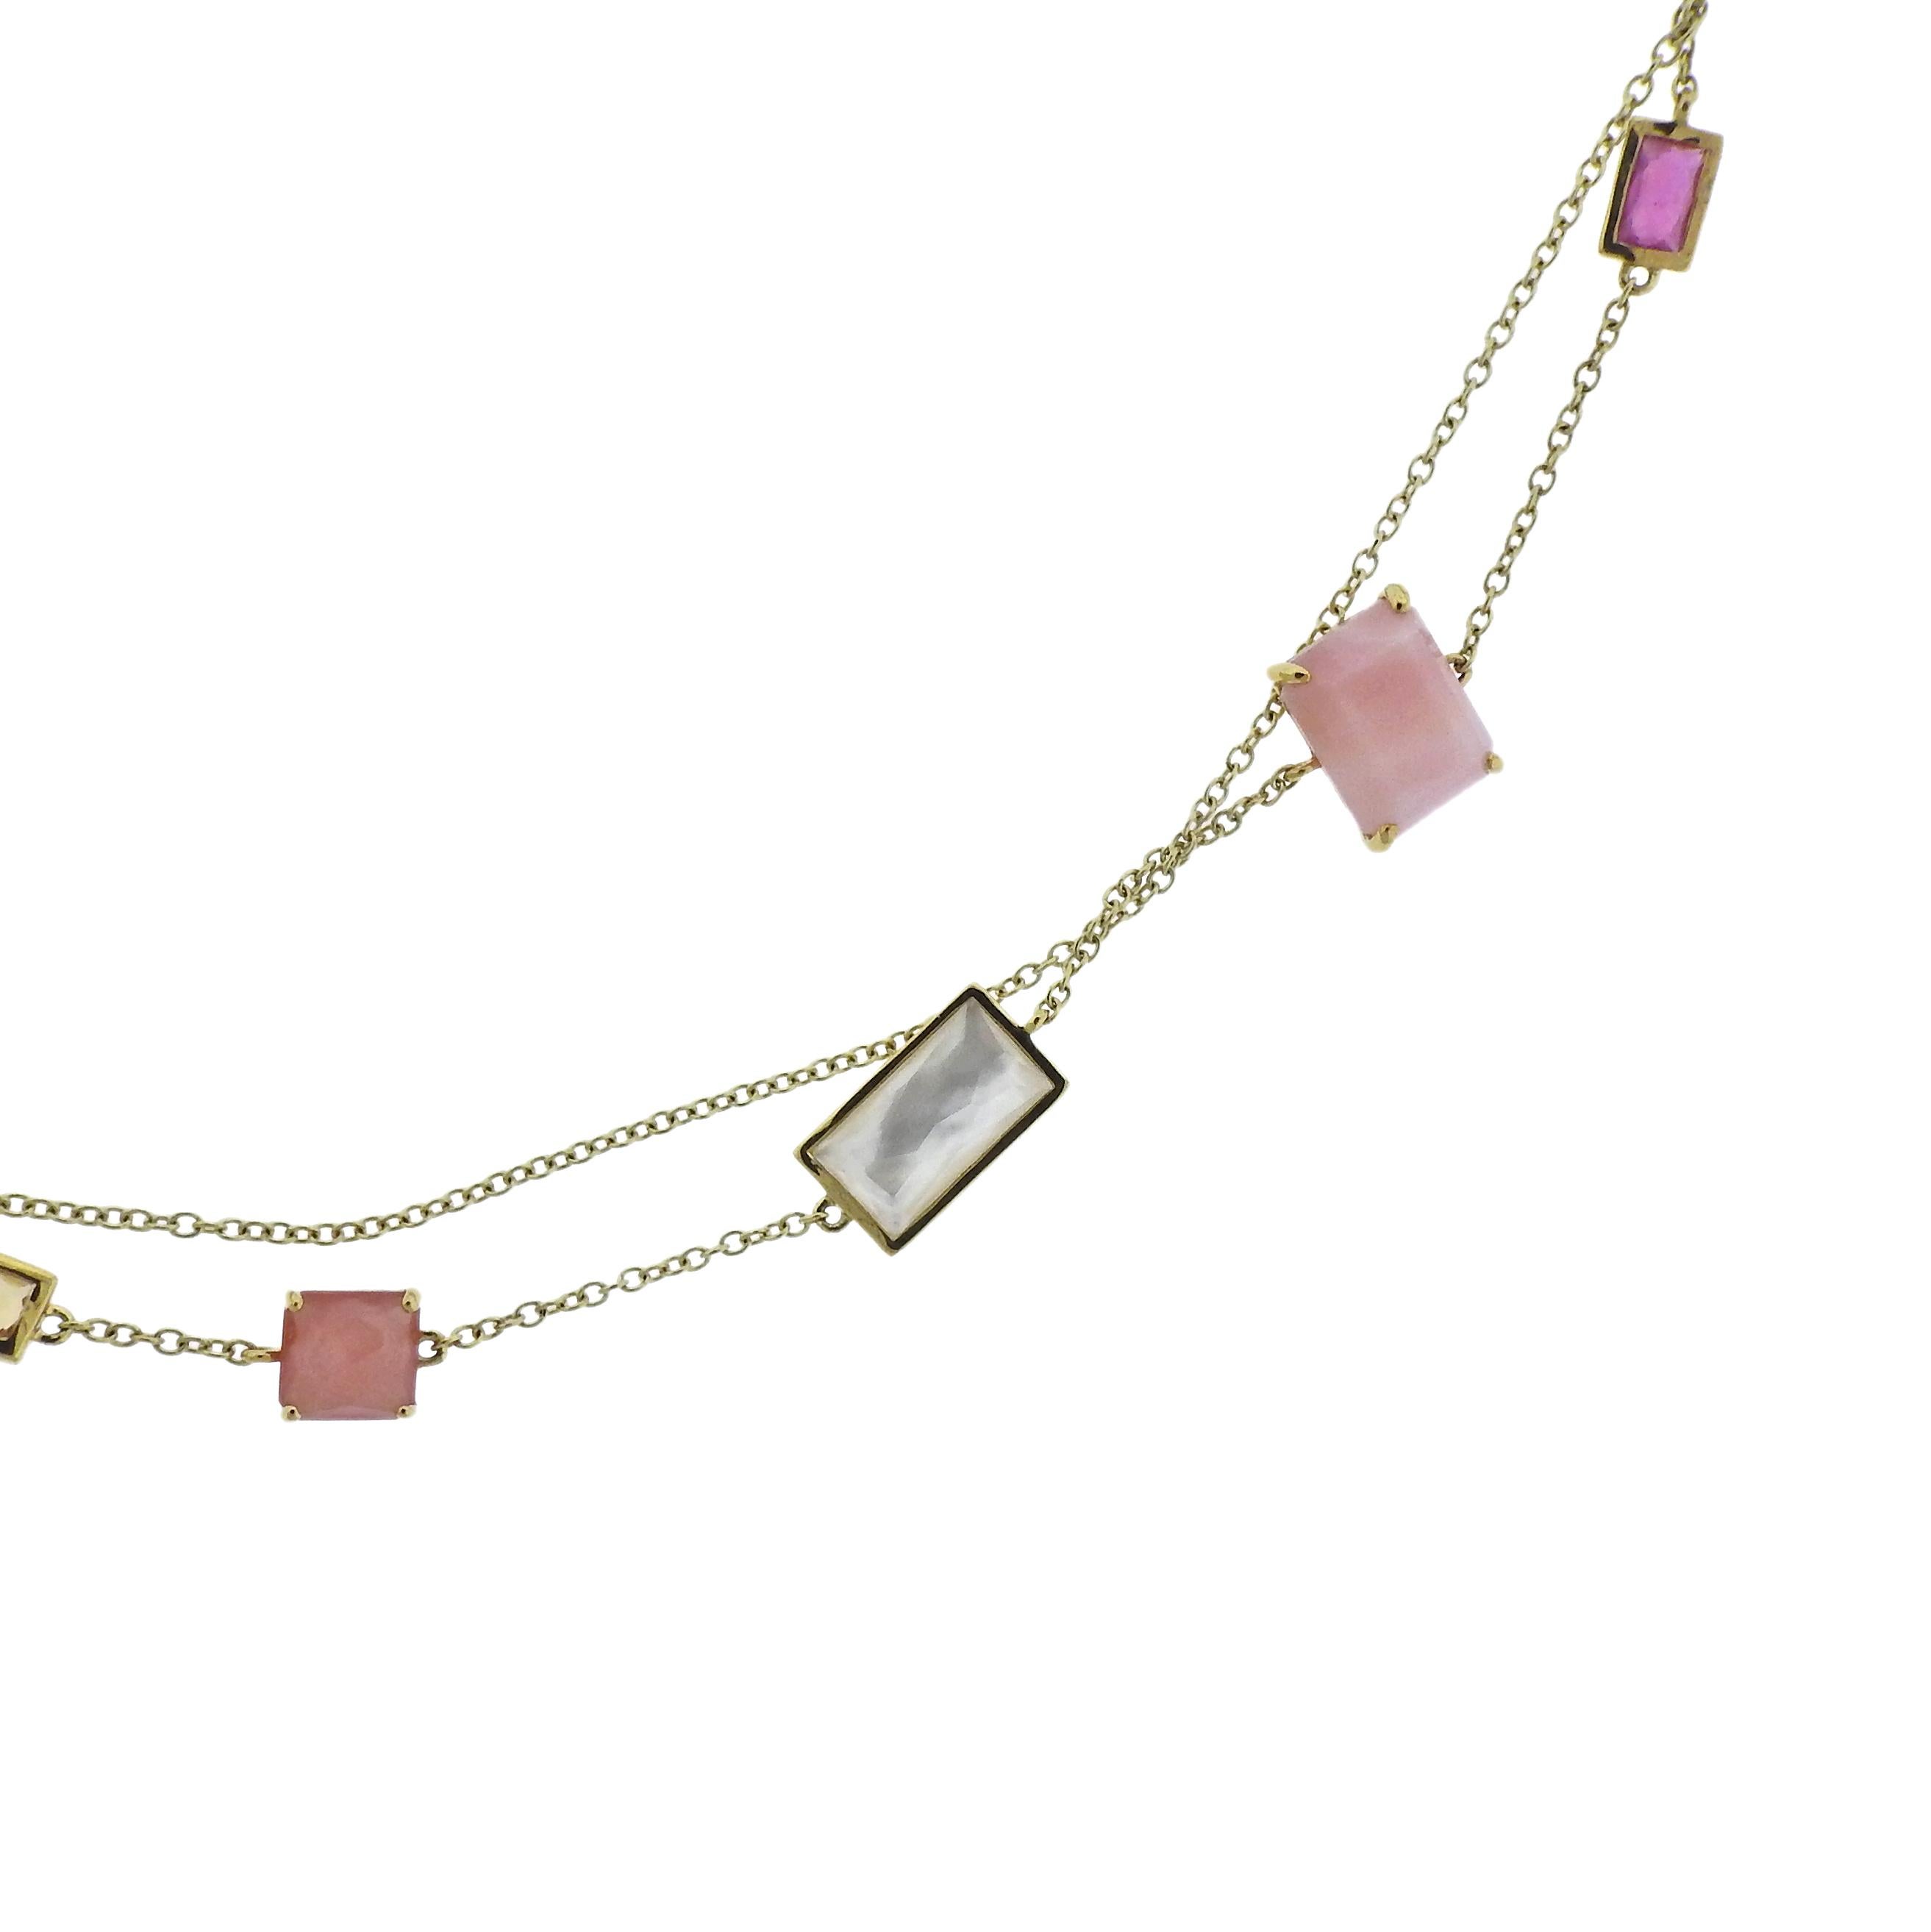 18k gol long station necklace by ippolita, set with Multi color quartz, turquoise, amethyst. Necklace is 36